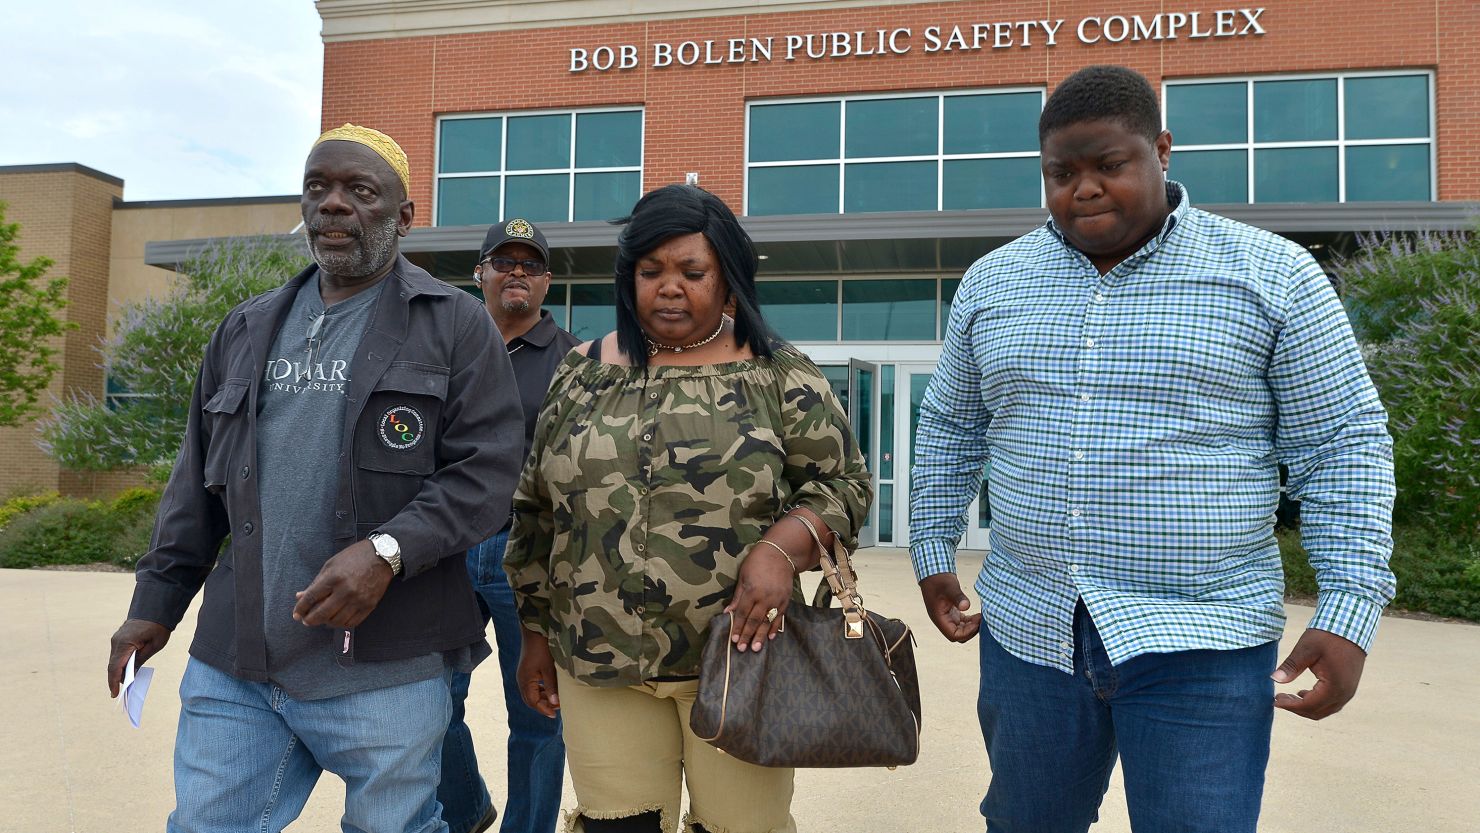 Pastor Michael Bell, left, accompanies Jacqueline Craig on Friday, May 19, 2017, at the Bob Bolen Public Safety Complex in Fort Worth, Texas. 